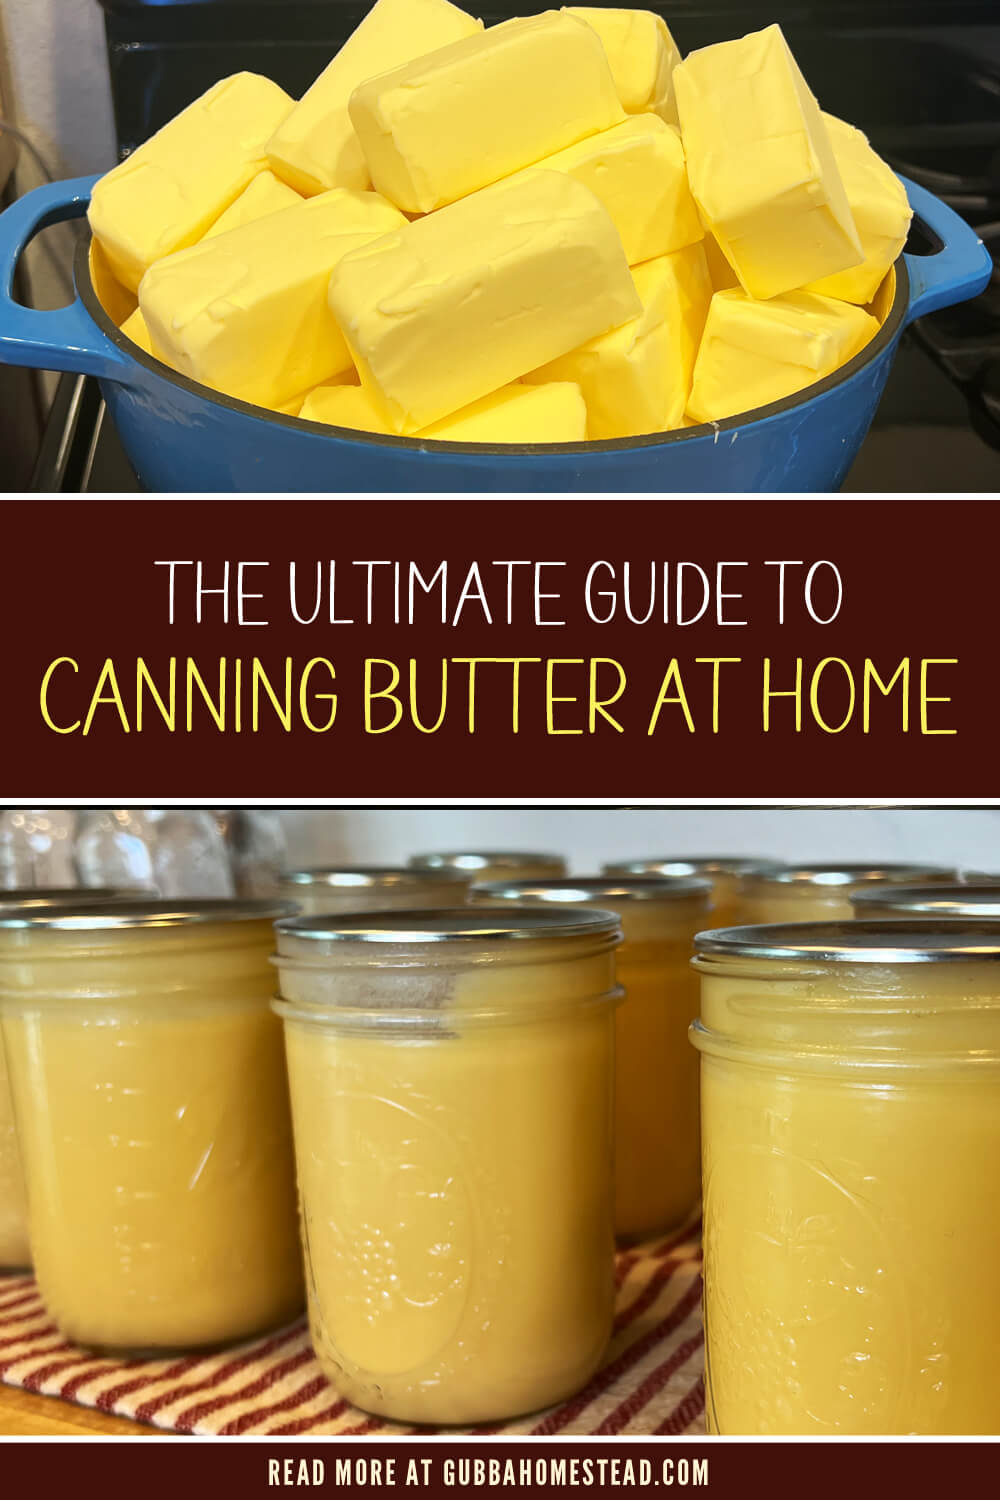 The Ultimate Guide To Canning Butter At Home